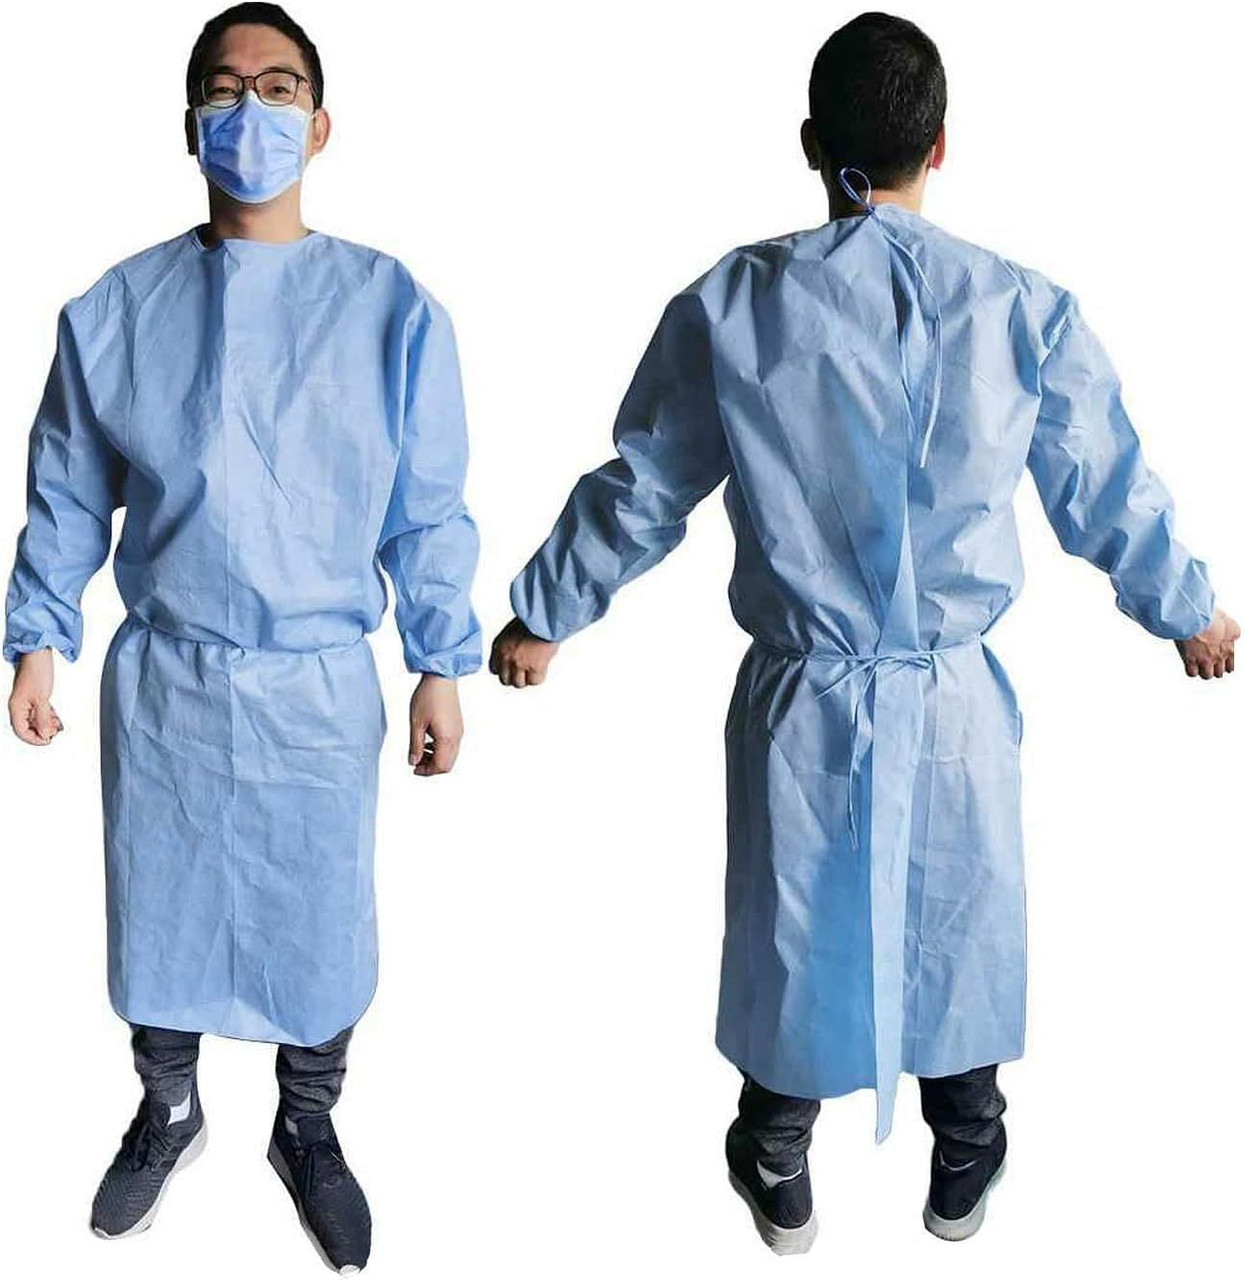 Polyethylene Robes Blue. Pack of 10 Adult Disposable Robes Large. Fluid-Resistant PE Frocks with Lo